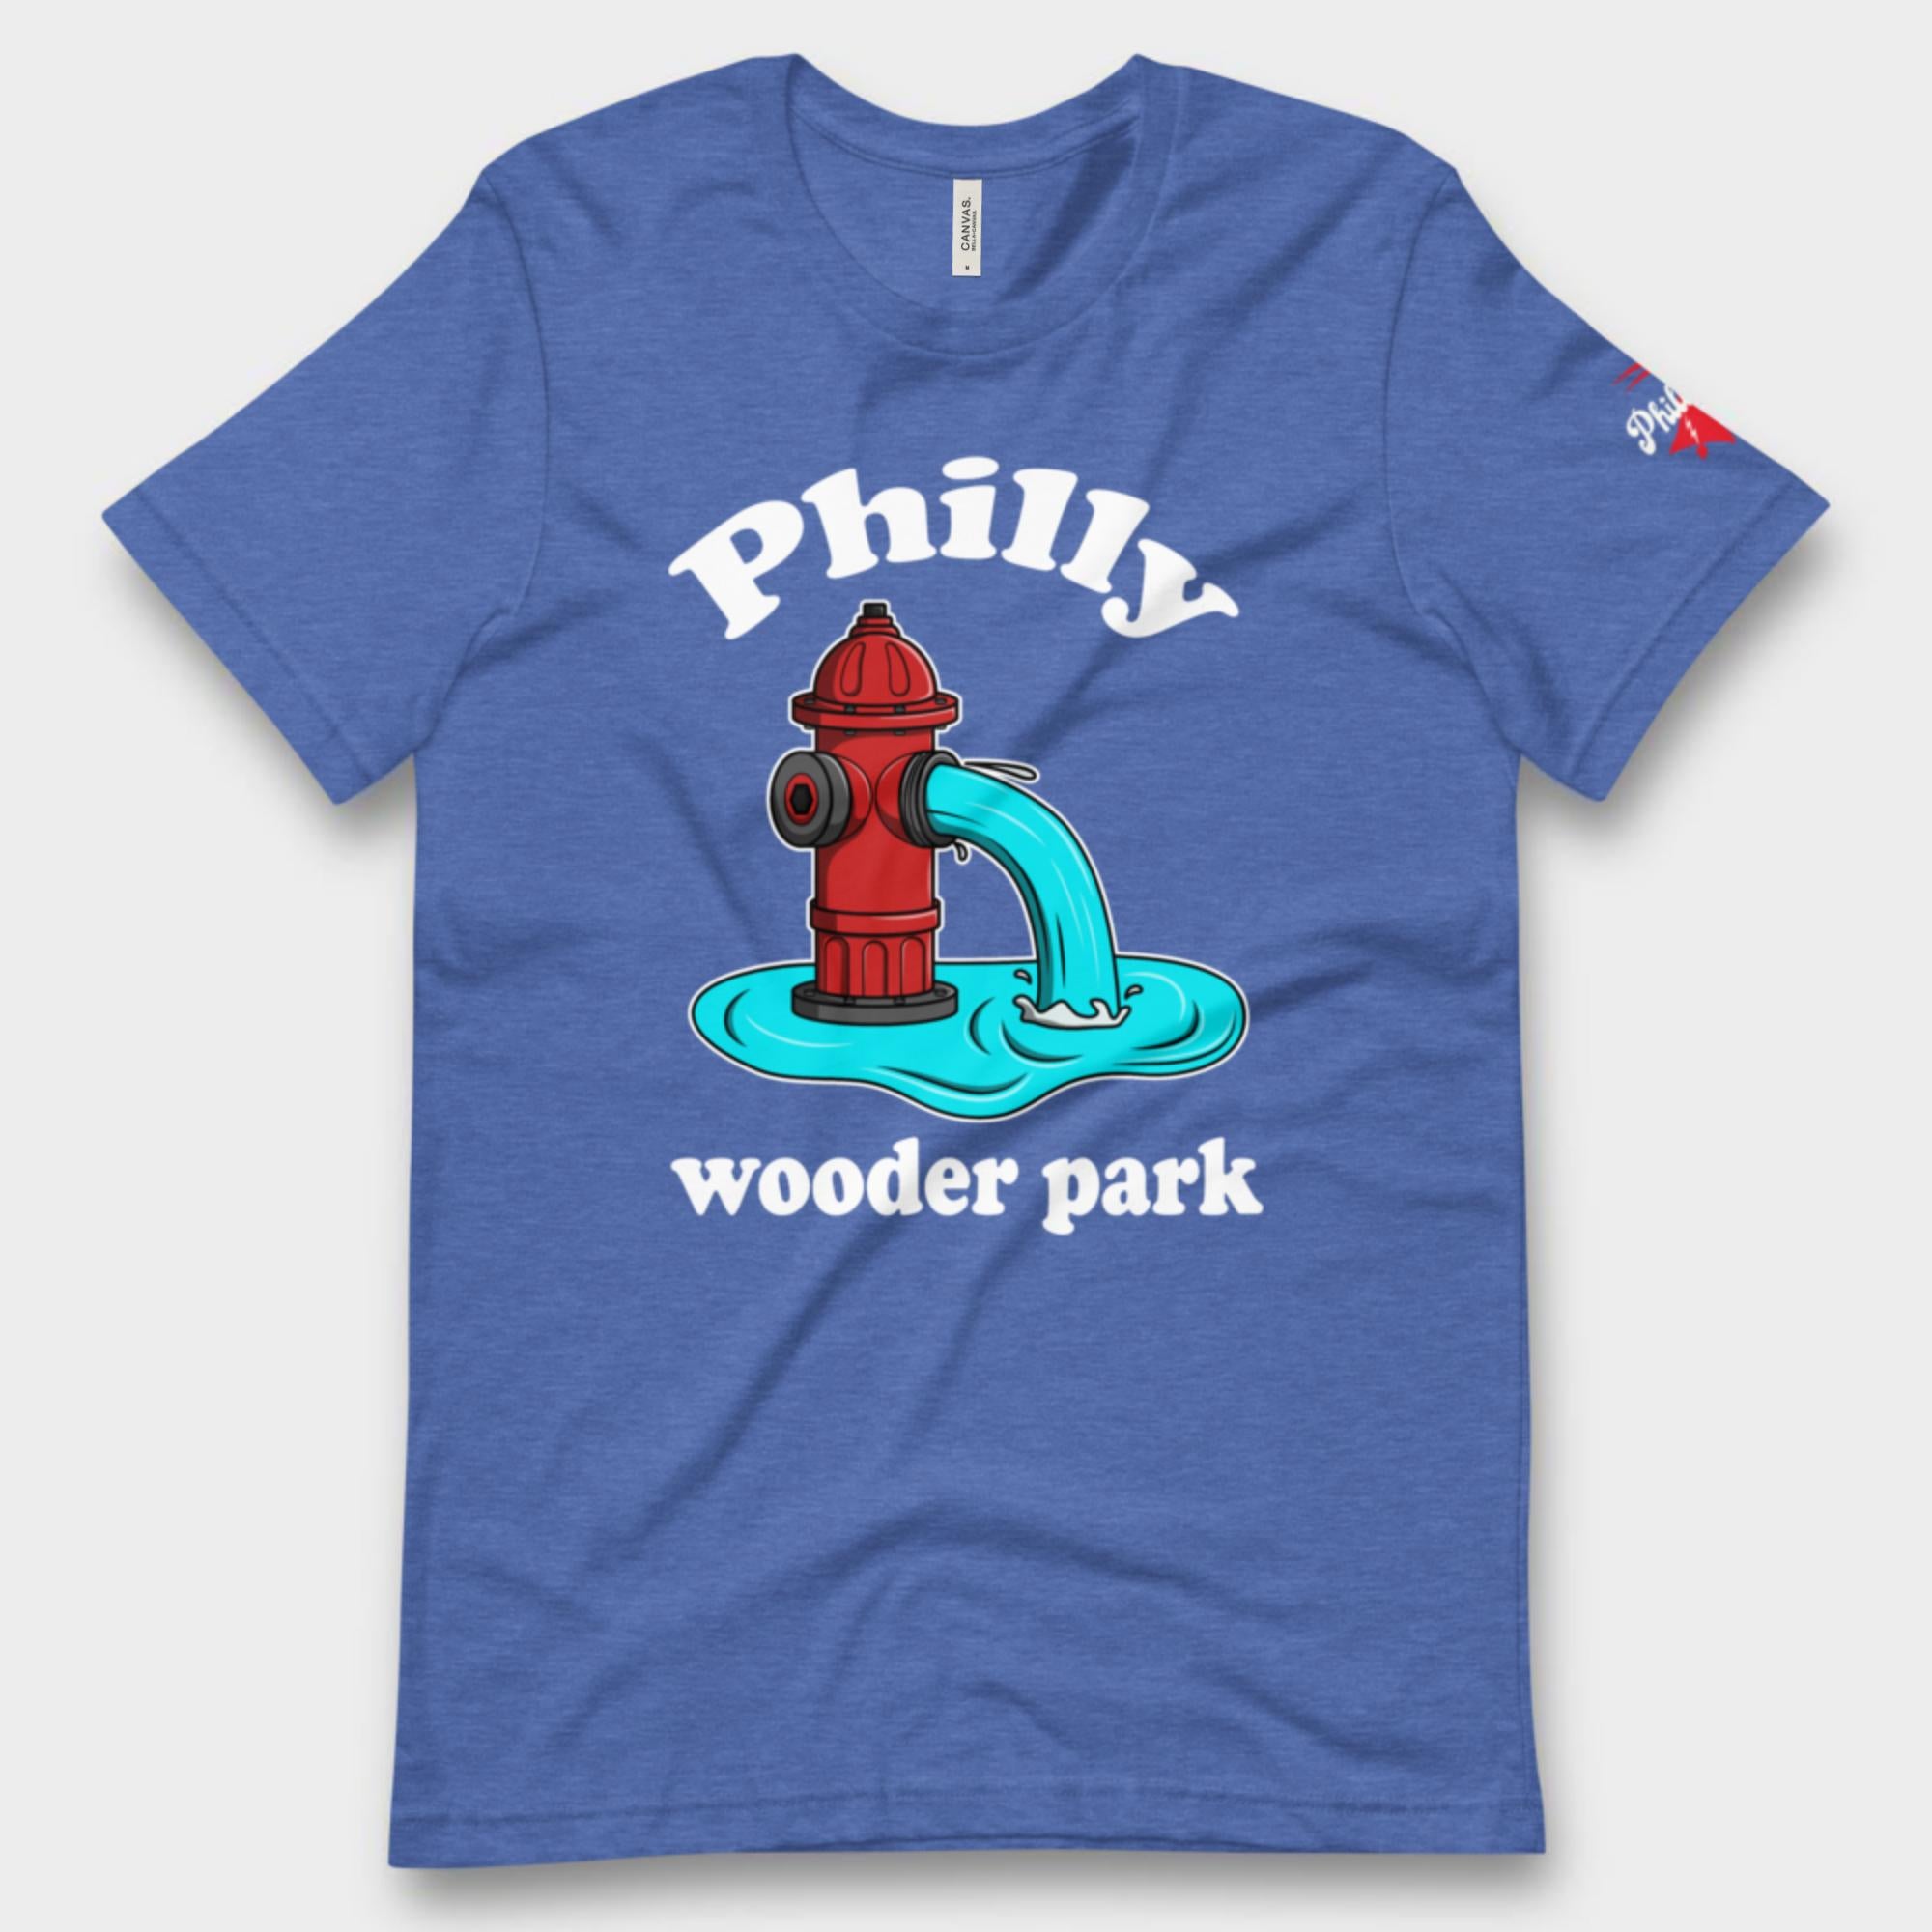 "Philly Wooder Park" Tee